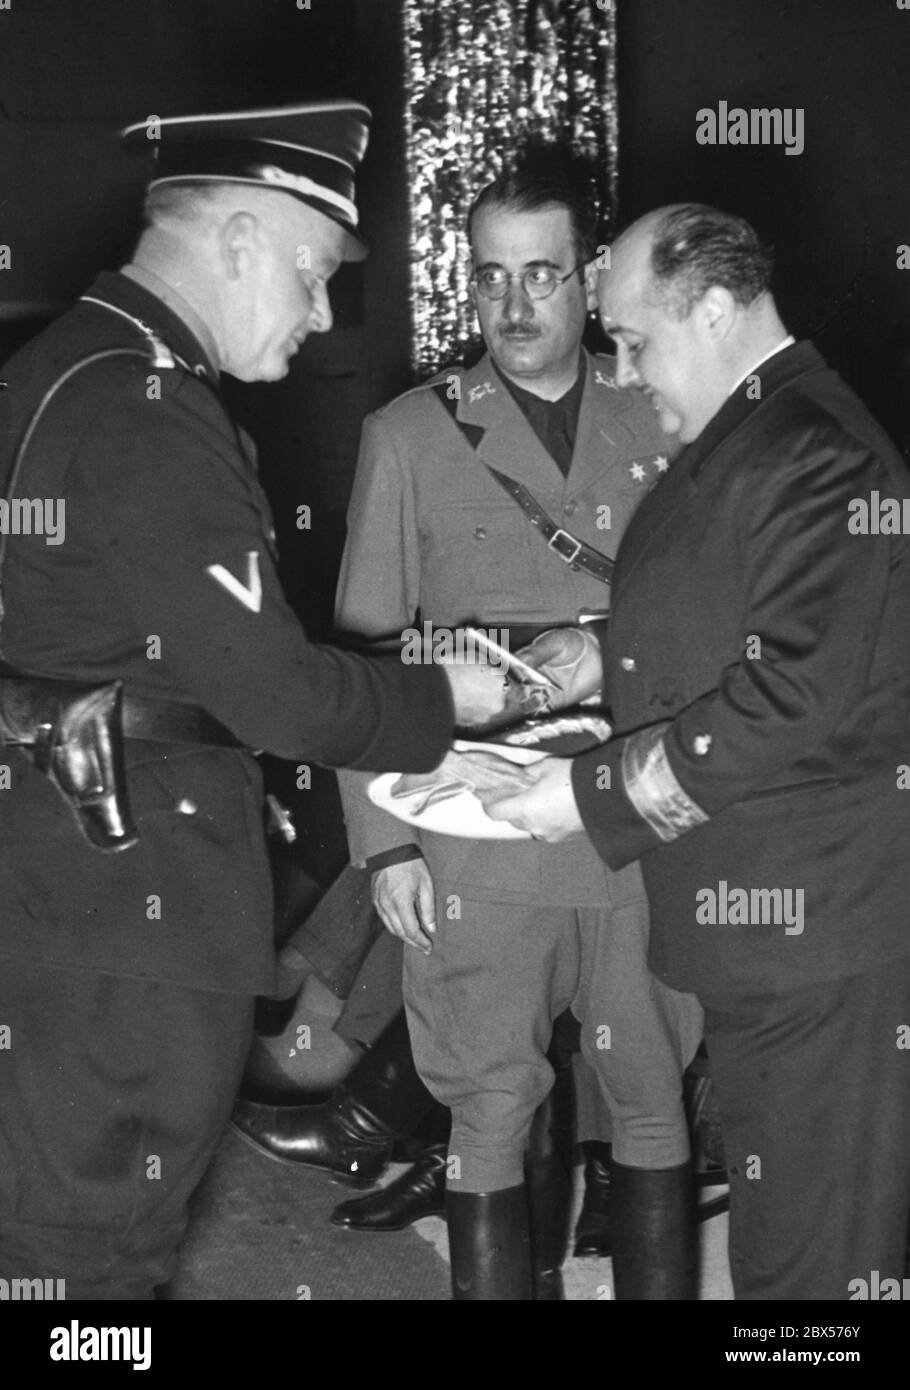 The Spanish Secretary of State Nicolas Franco, brother of Francisco Franco and Ramon Franco, gives an autograph to an SS-Hauptsturmfuehrer before the beginning of the final rally of the Reichsparteitag der Arbeit ('Party Congress of Labor') in Nuremberg. Stock Photo